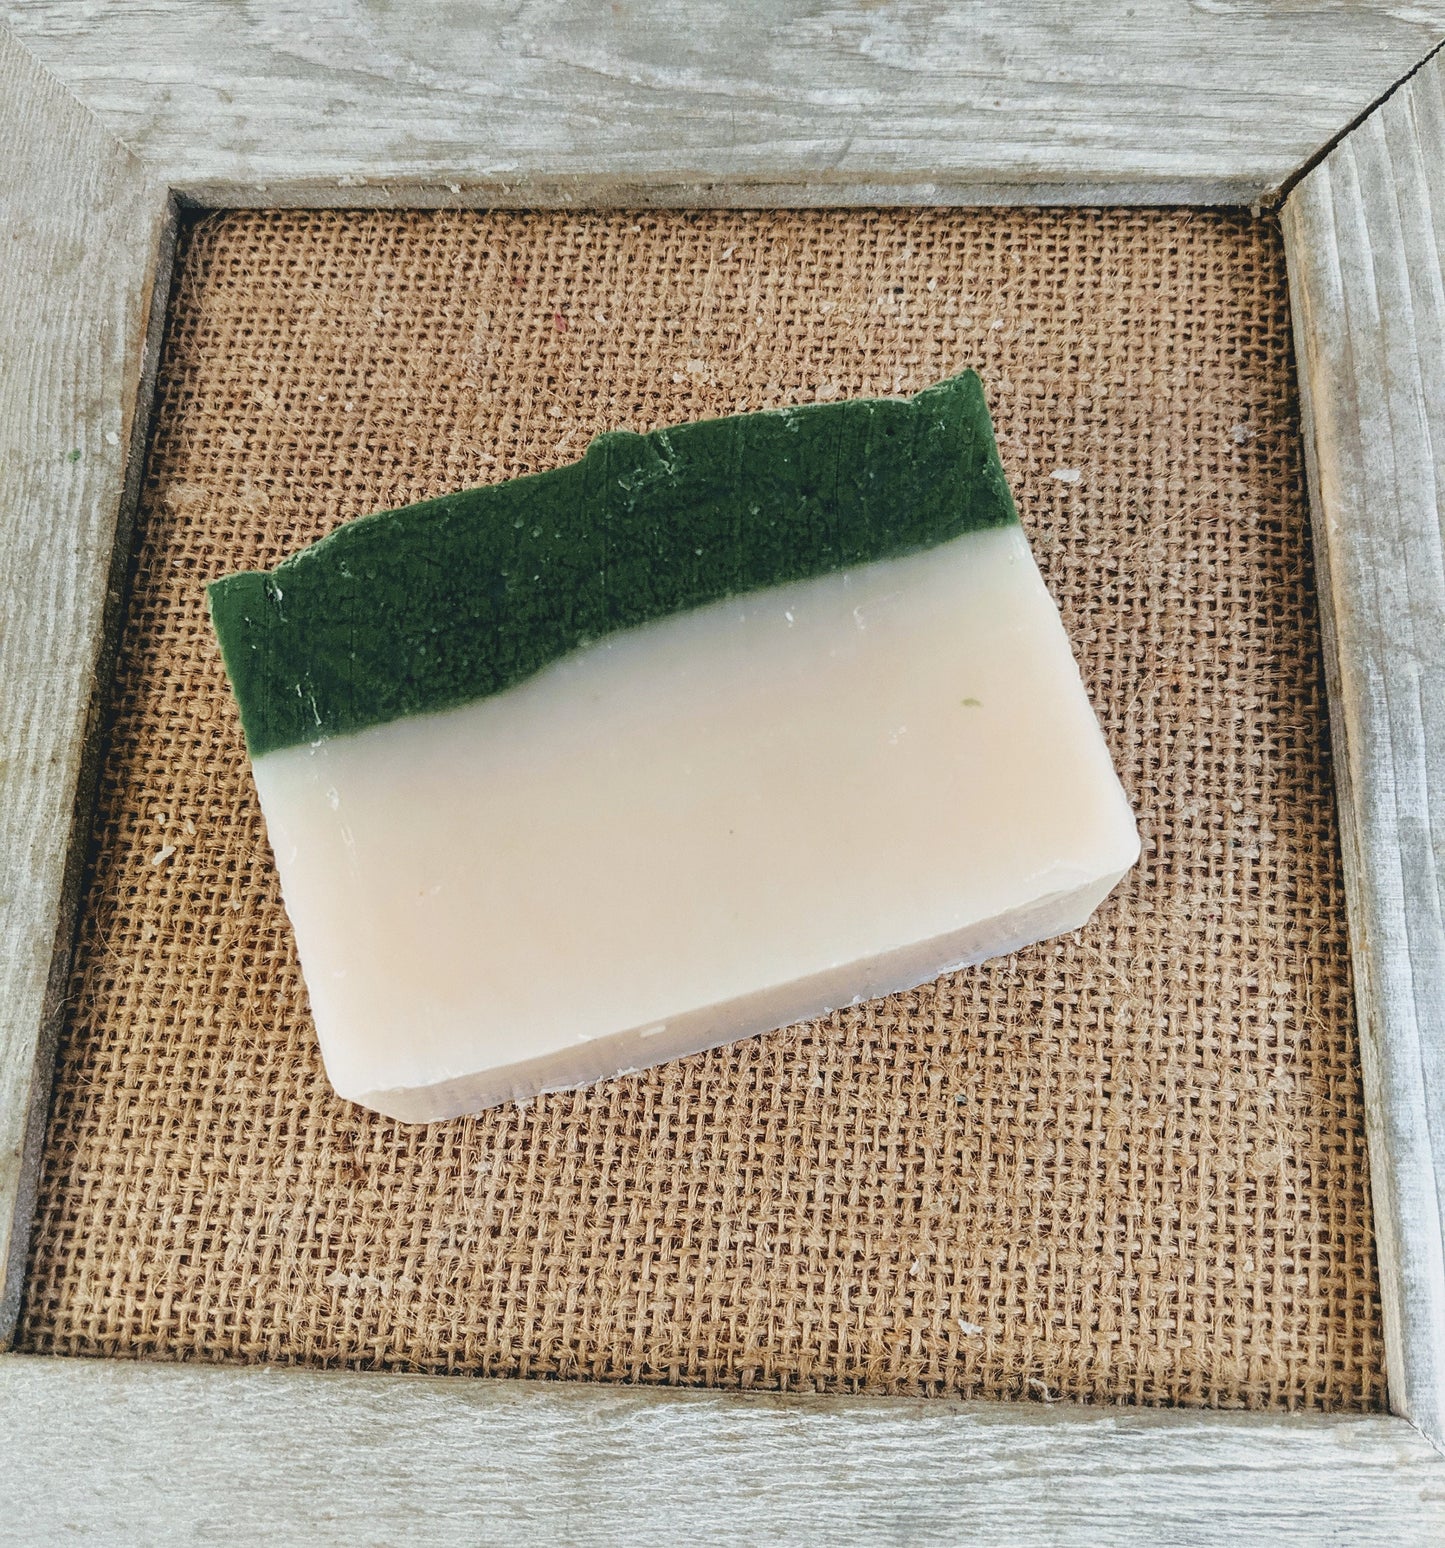 Irish Luck Soap - soap for men - shea butter soap - Hanna Herbals - Gifts for men